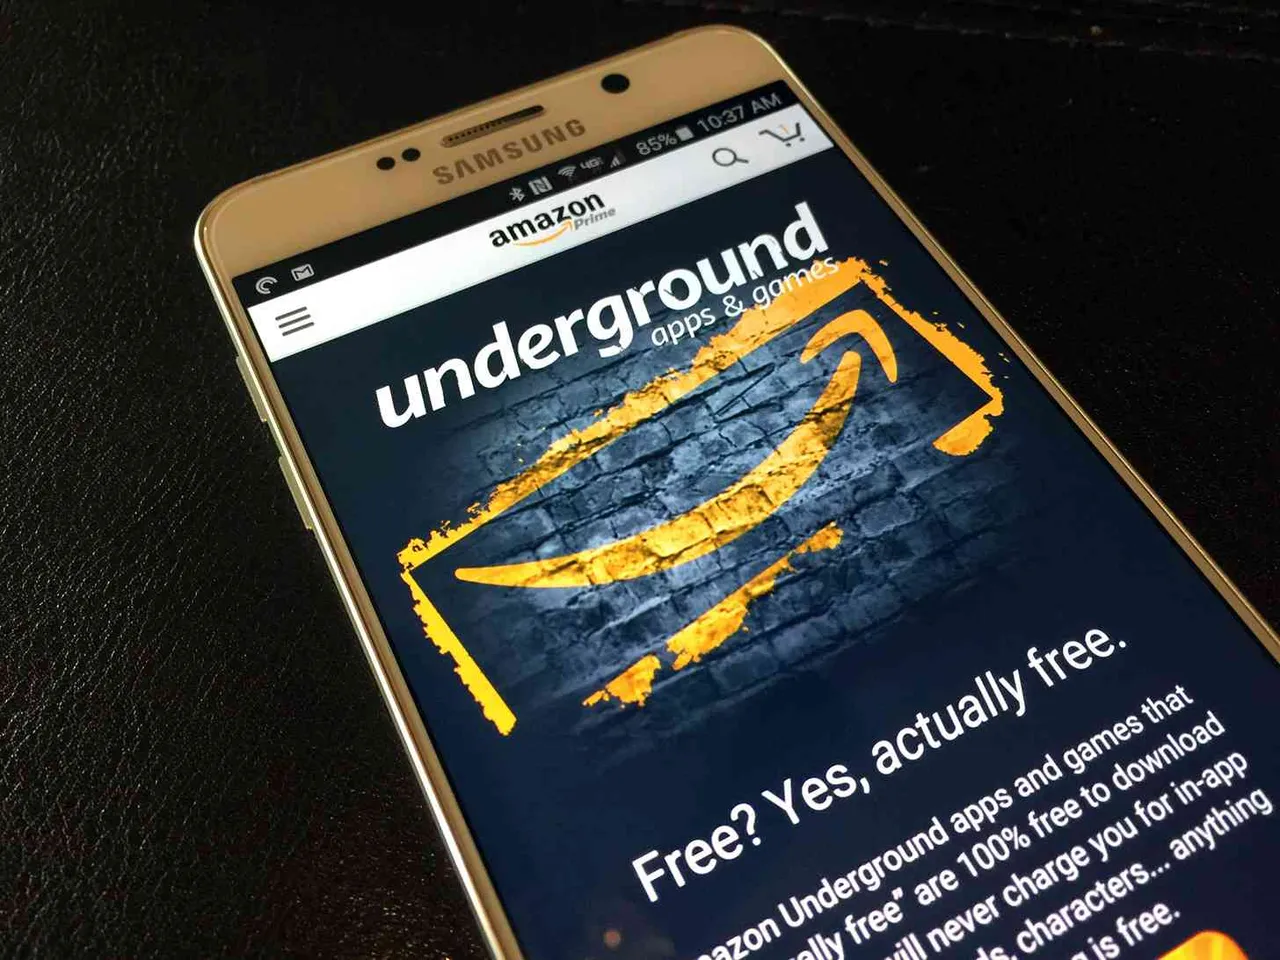 CIOL Amazon to shut down 'Underground Actually Free' program that offers Android apps for free